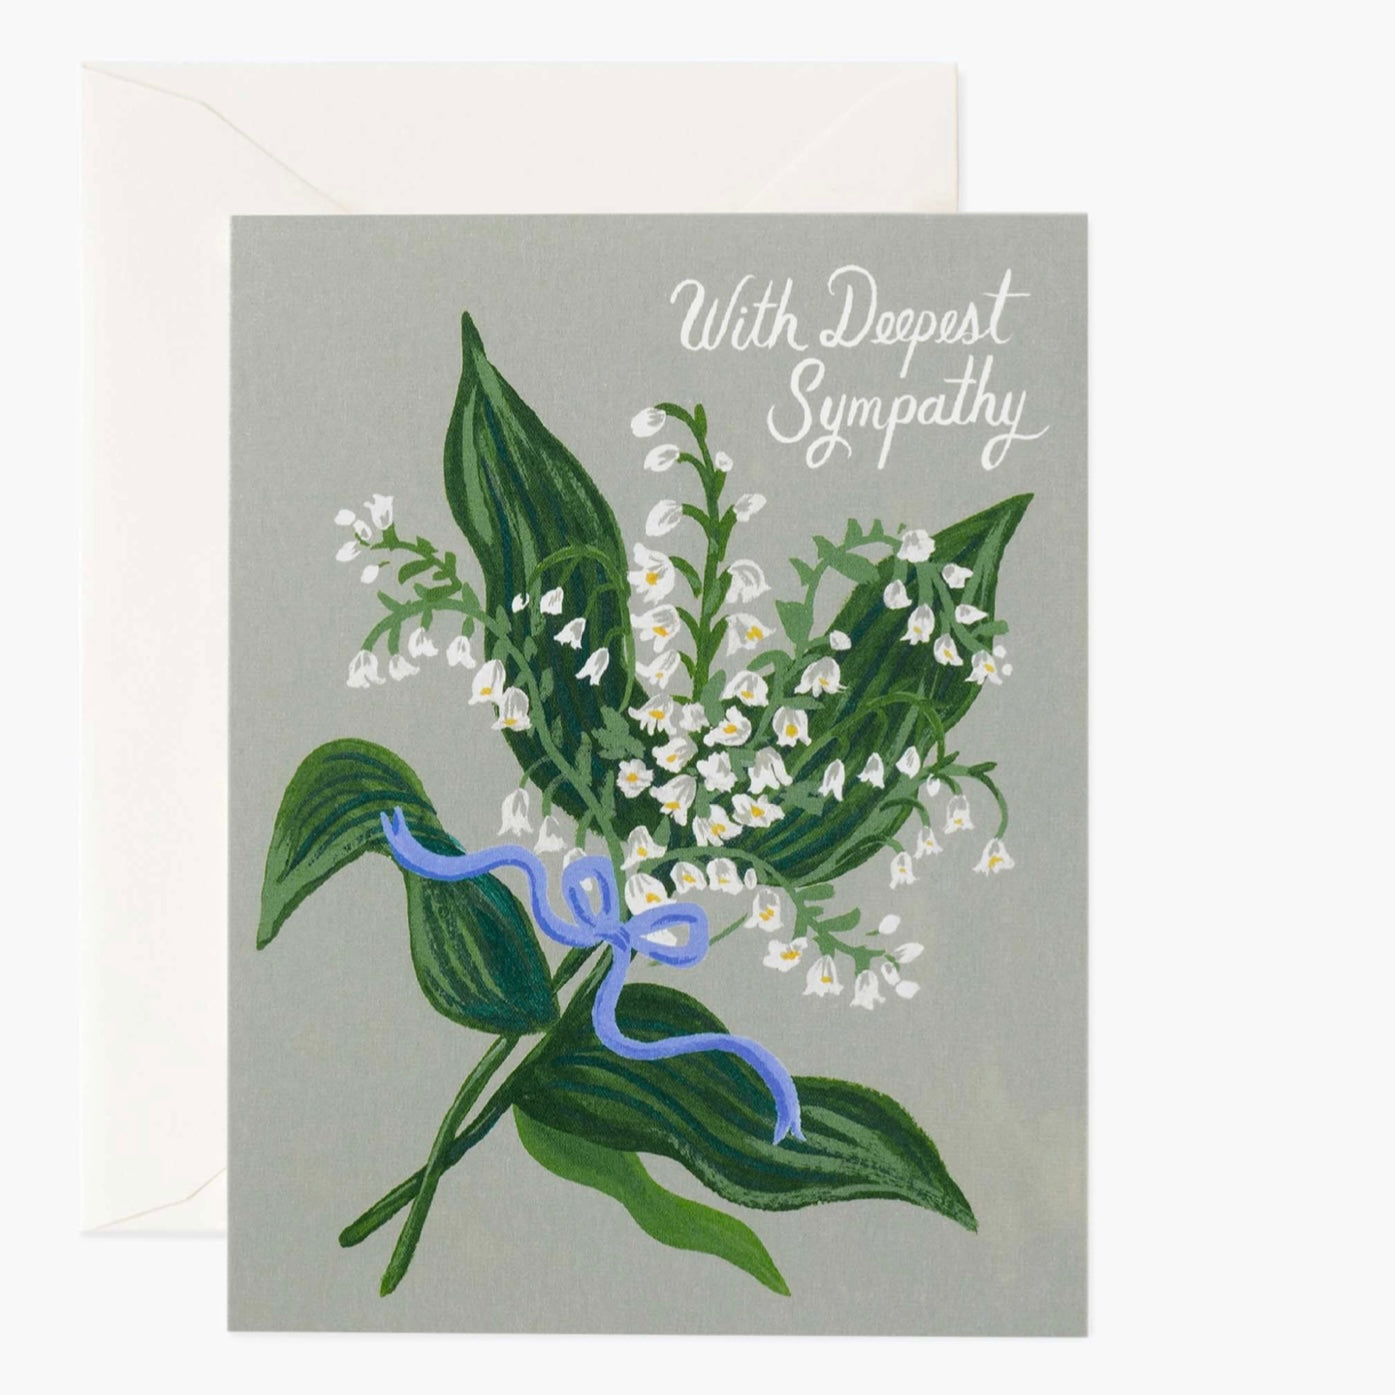 With Deepest Sympathy by Rifle Cards